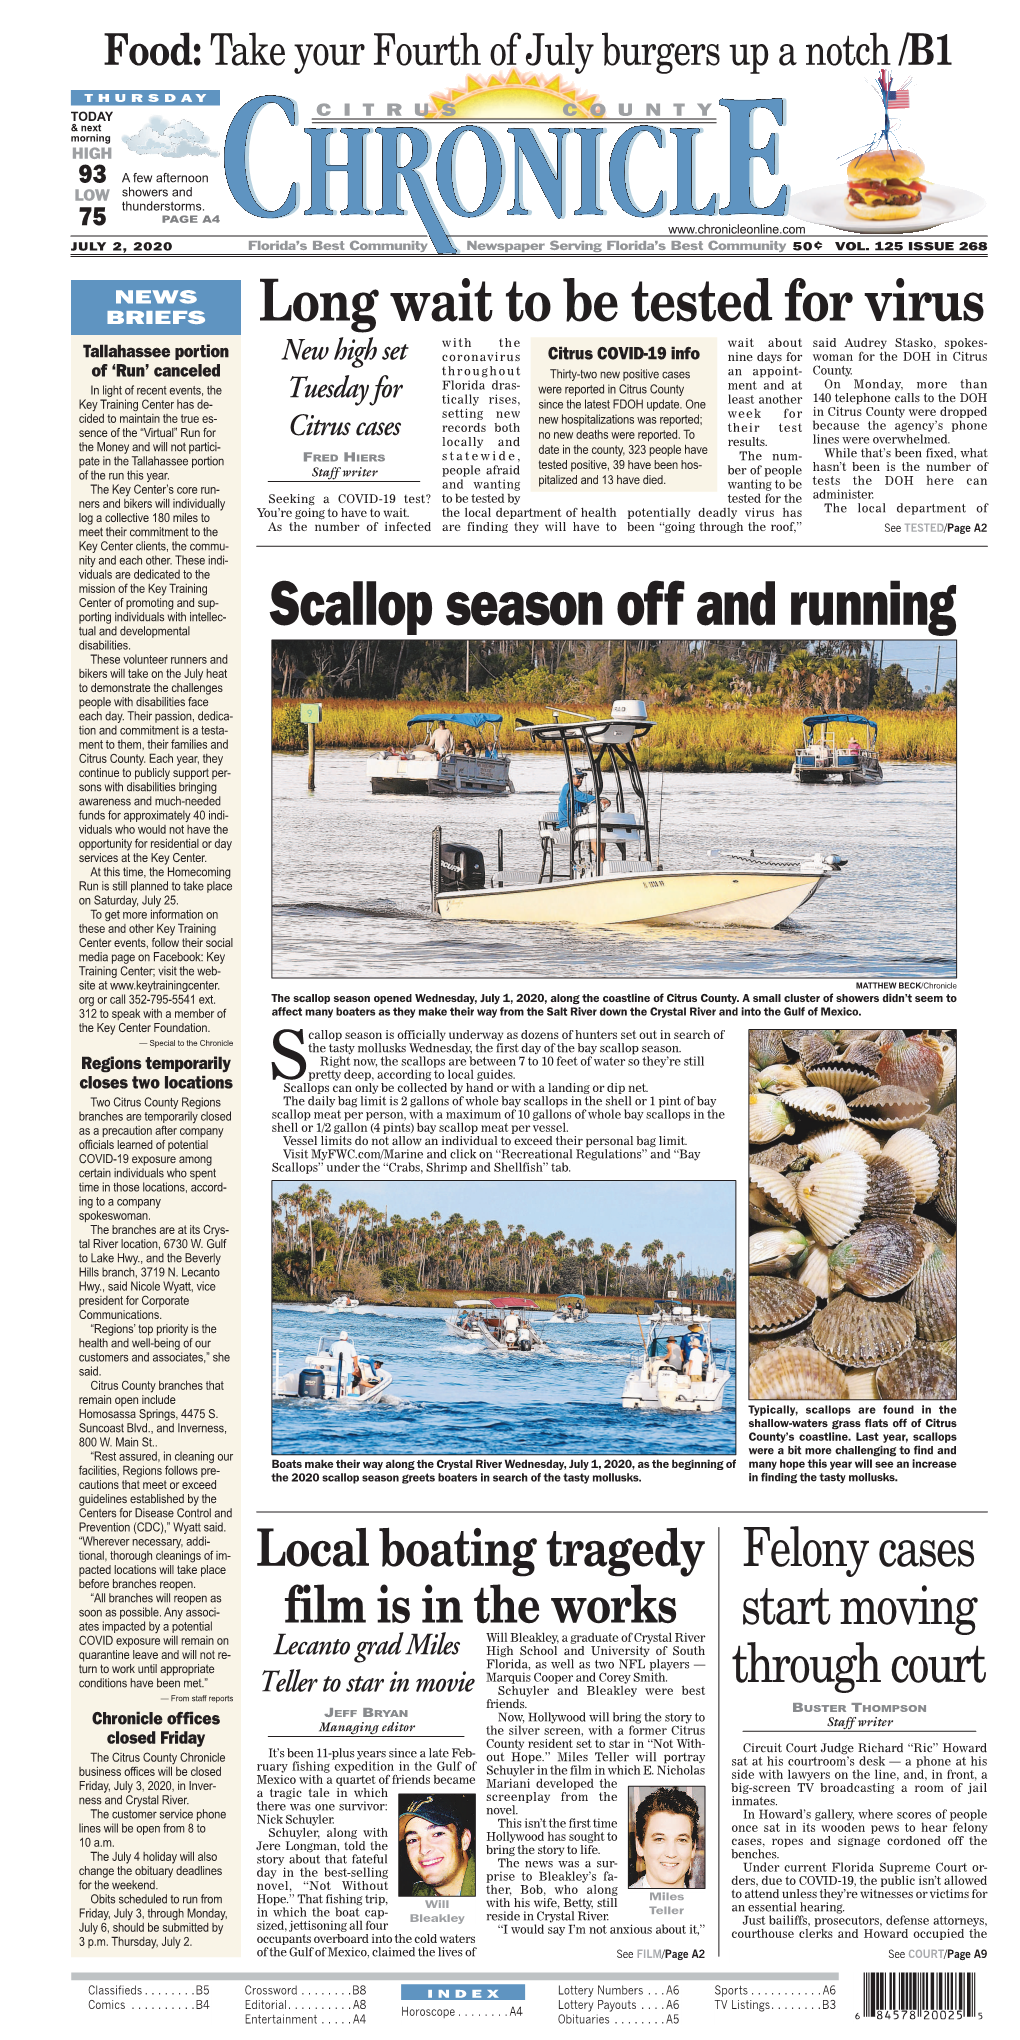 Scallop Season Off and Running Tual and Developmental Disabilities